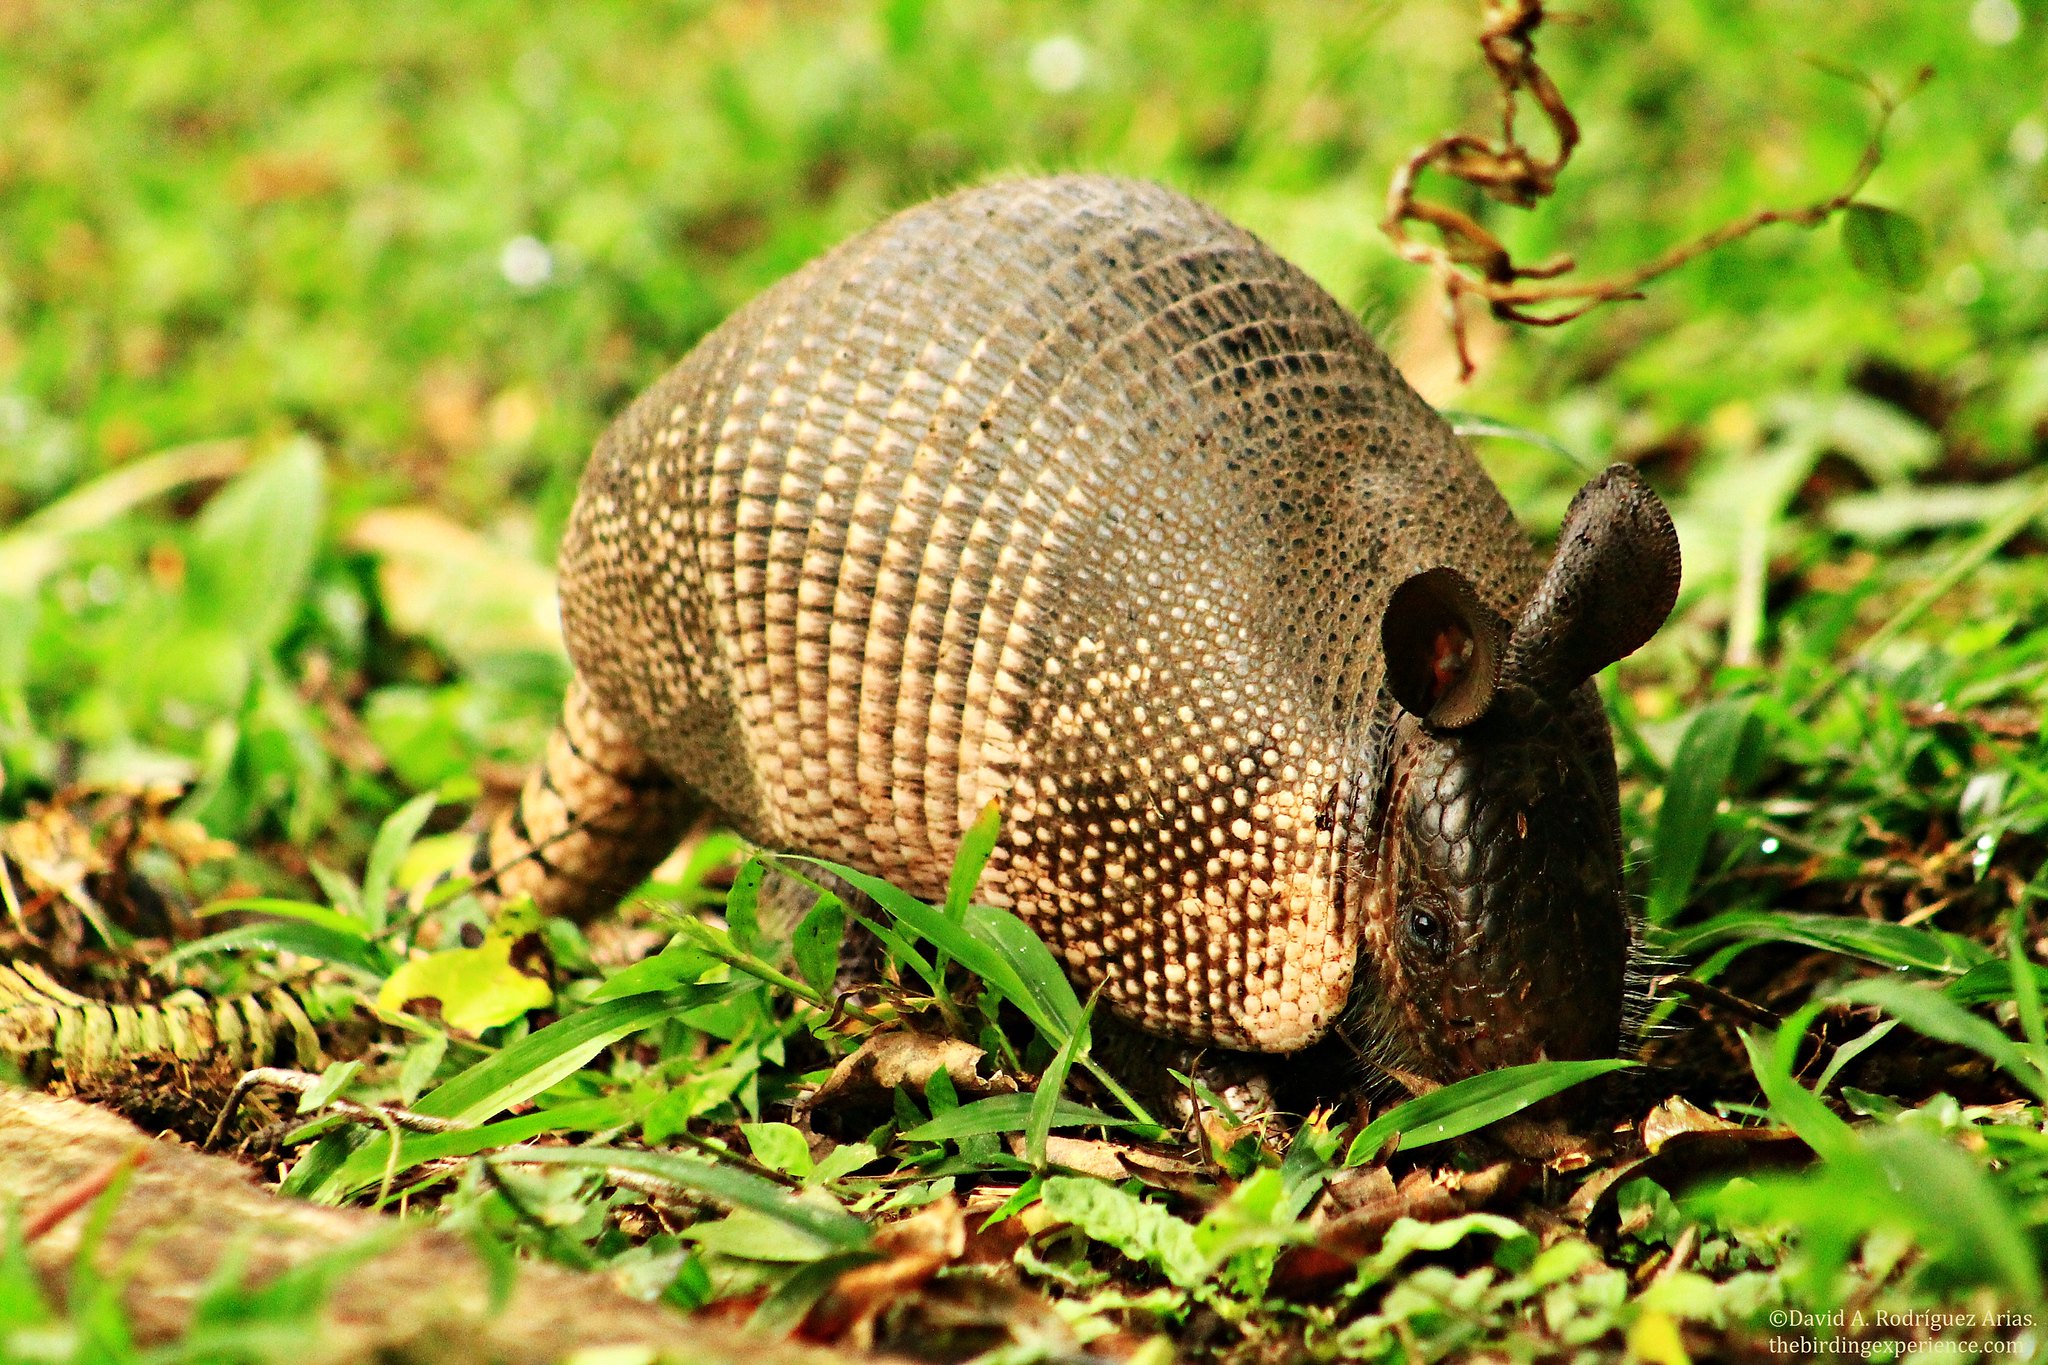 Five Facts: Nine-banded armadillo – Research News